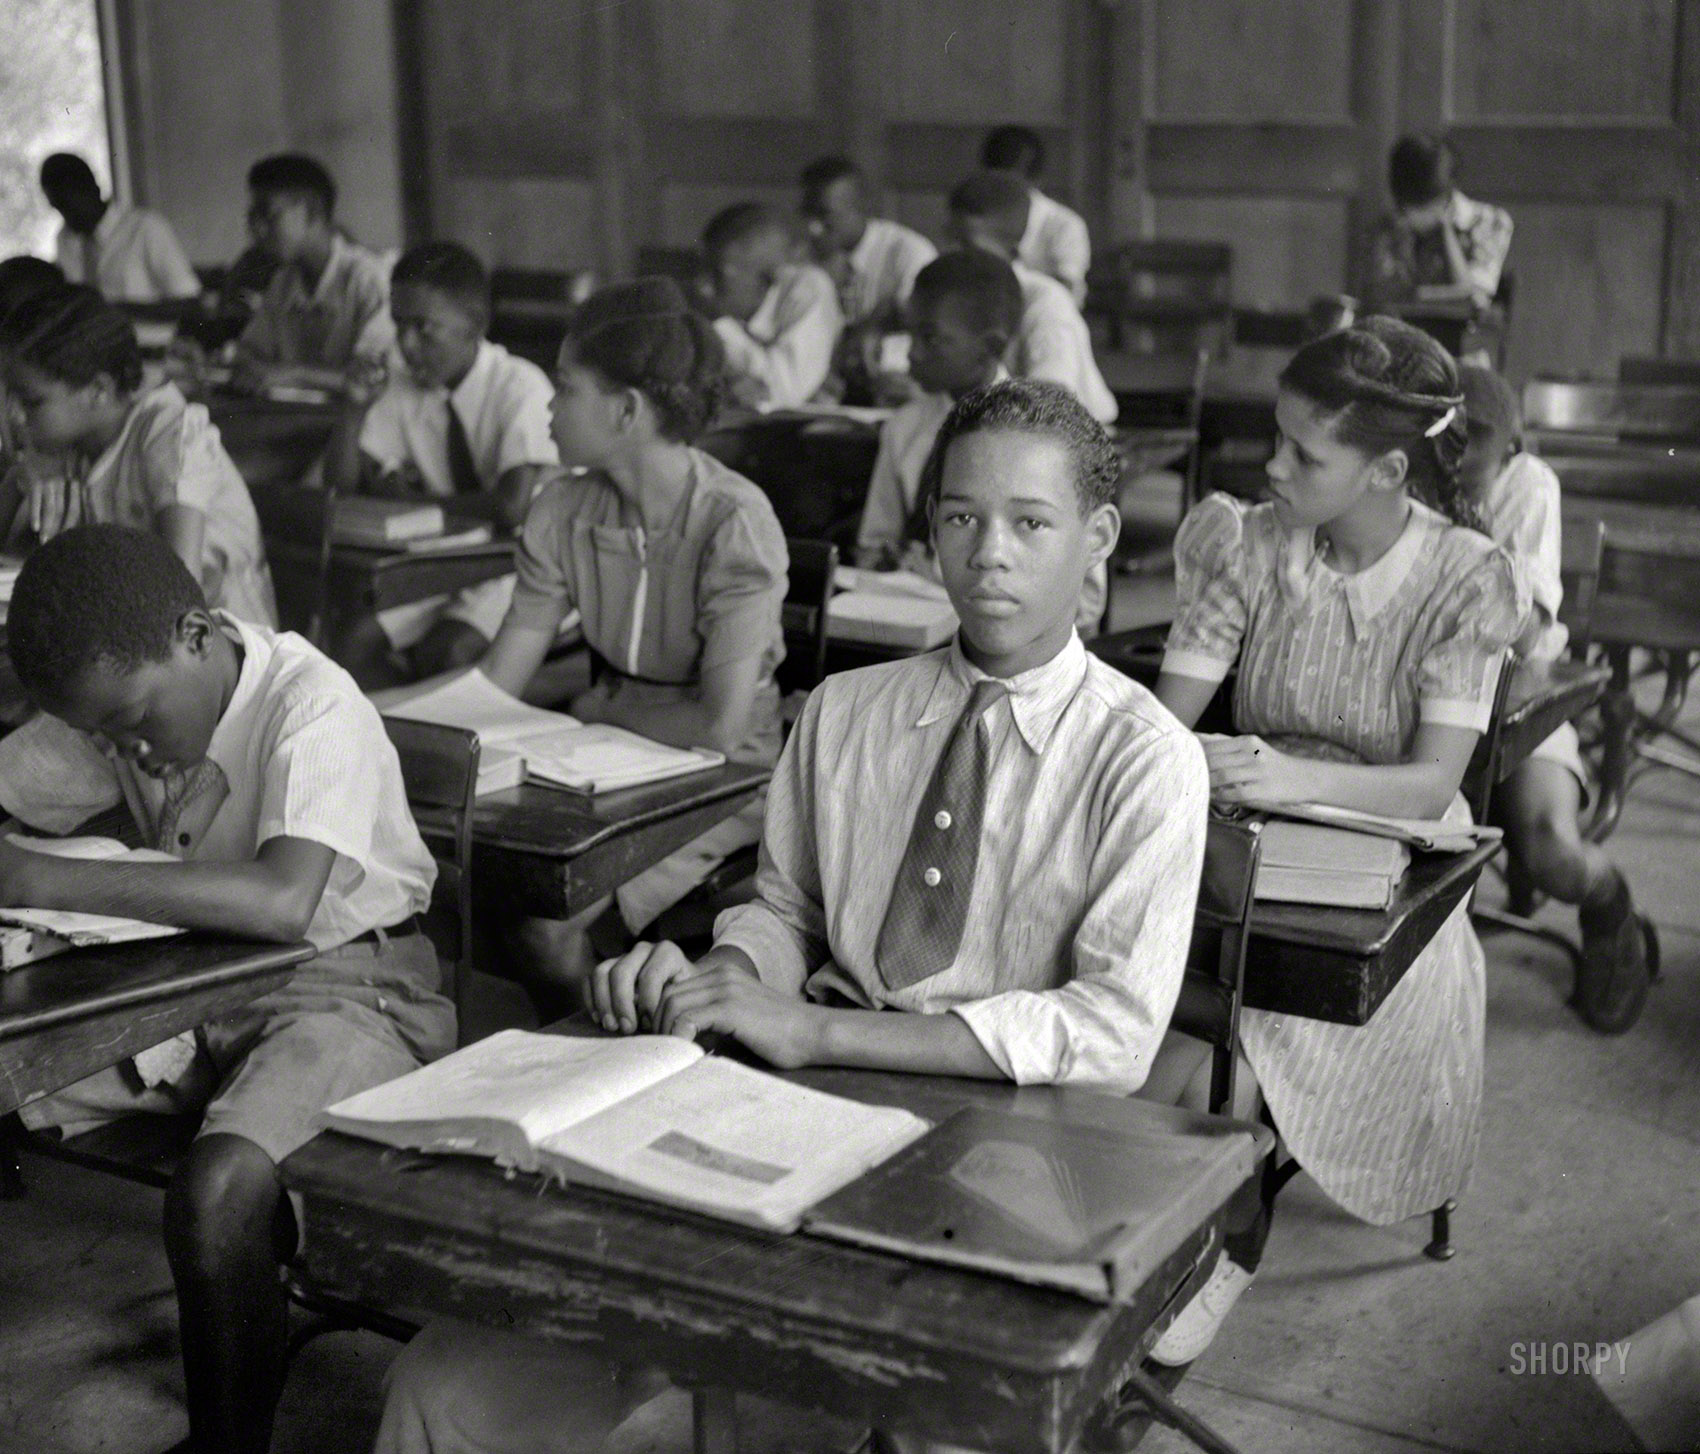 December 1941. "Saint Croix, Virgin Islands. A classroom of the Christiansted high school." Photo by Jack Delano, who certainly got around. View full size.